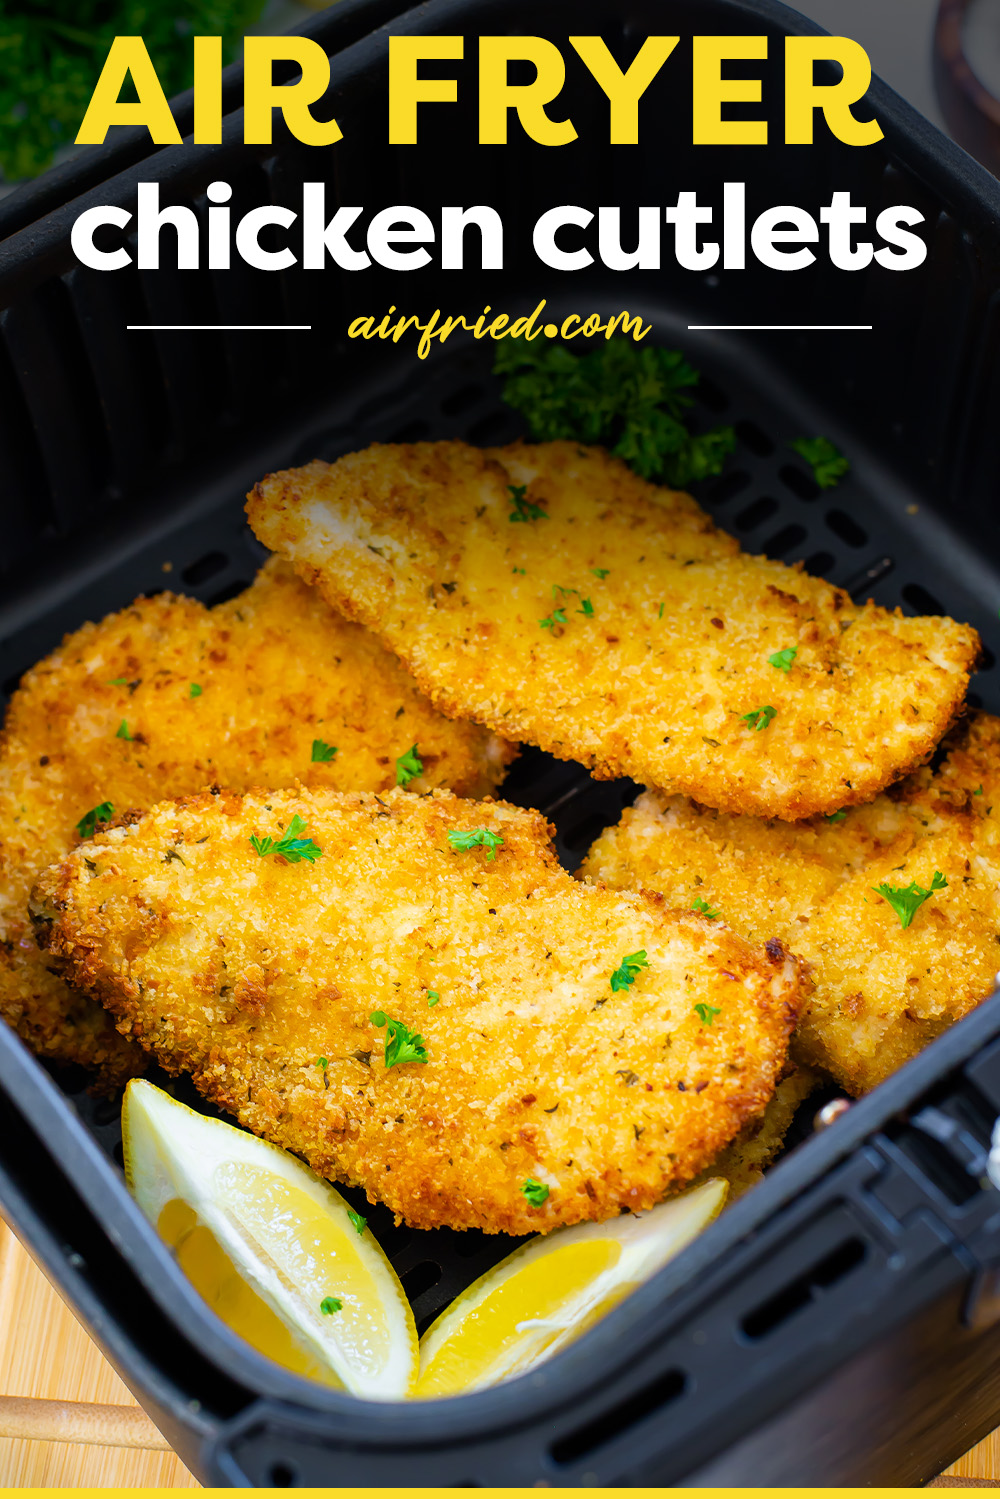 These air fried chicken cutlets come out of your air fryer with a lightly seasoned, crispy breading and a juicy, tender center!